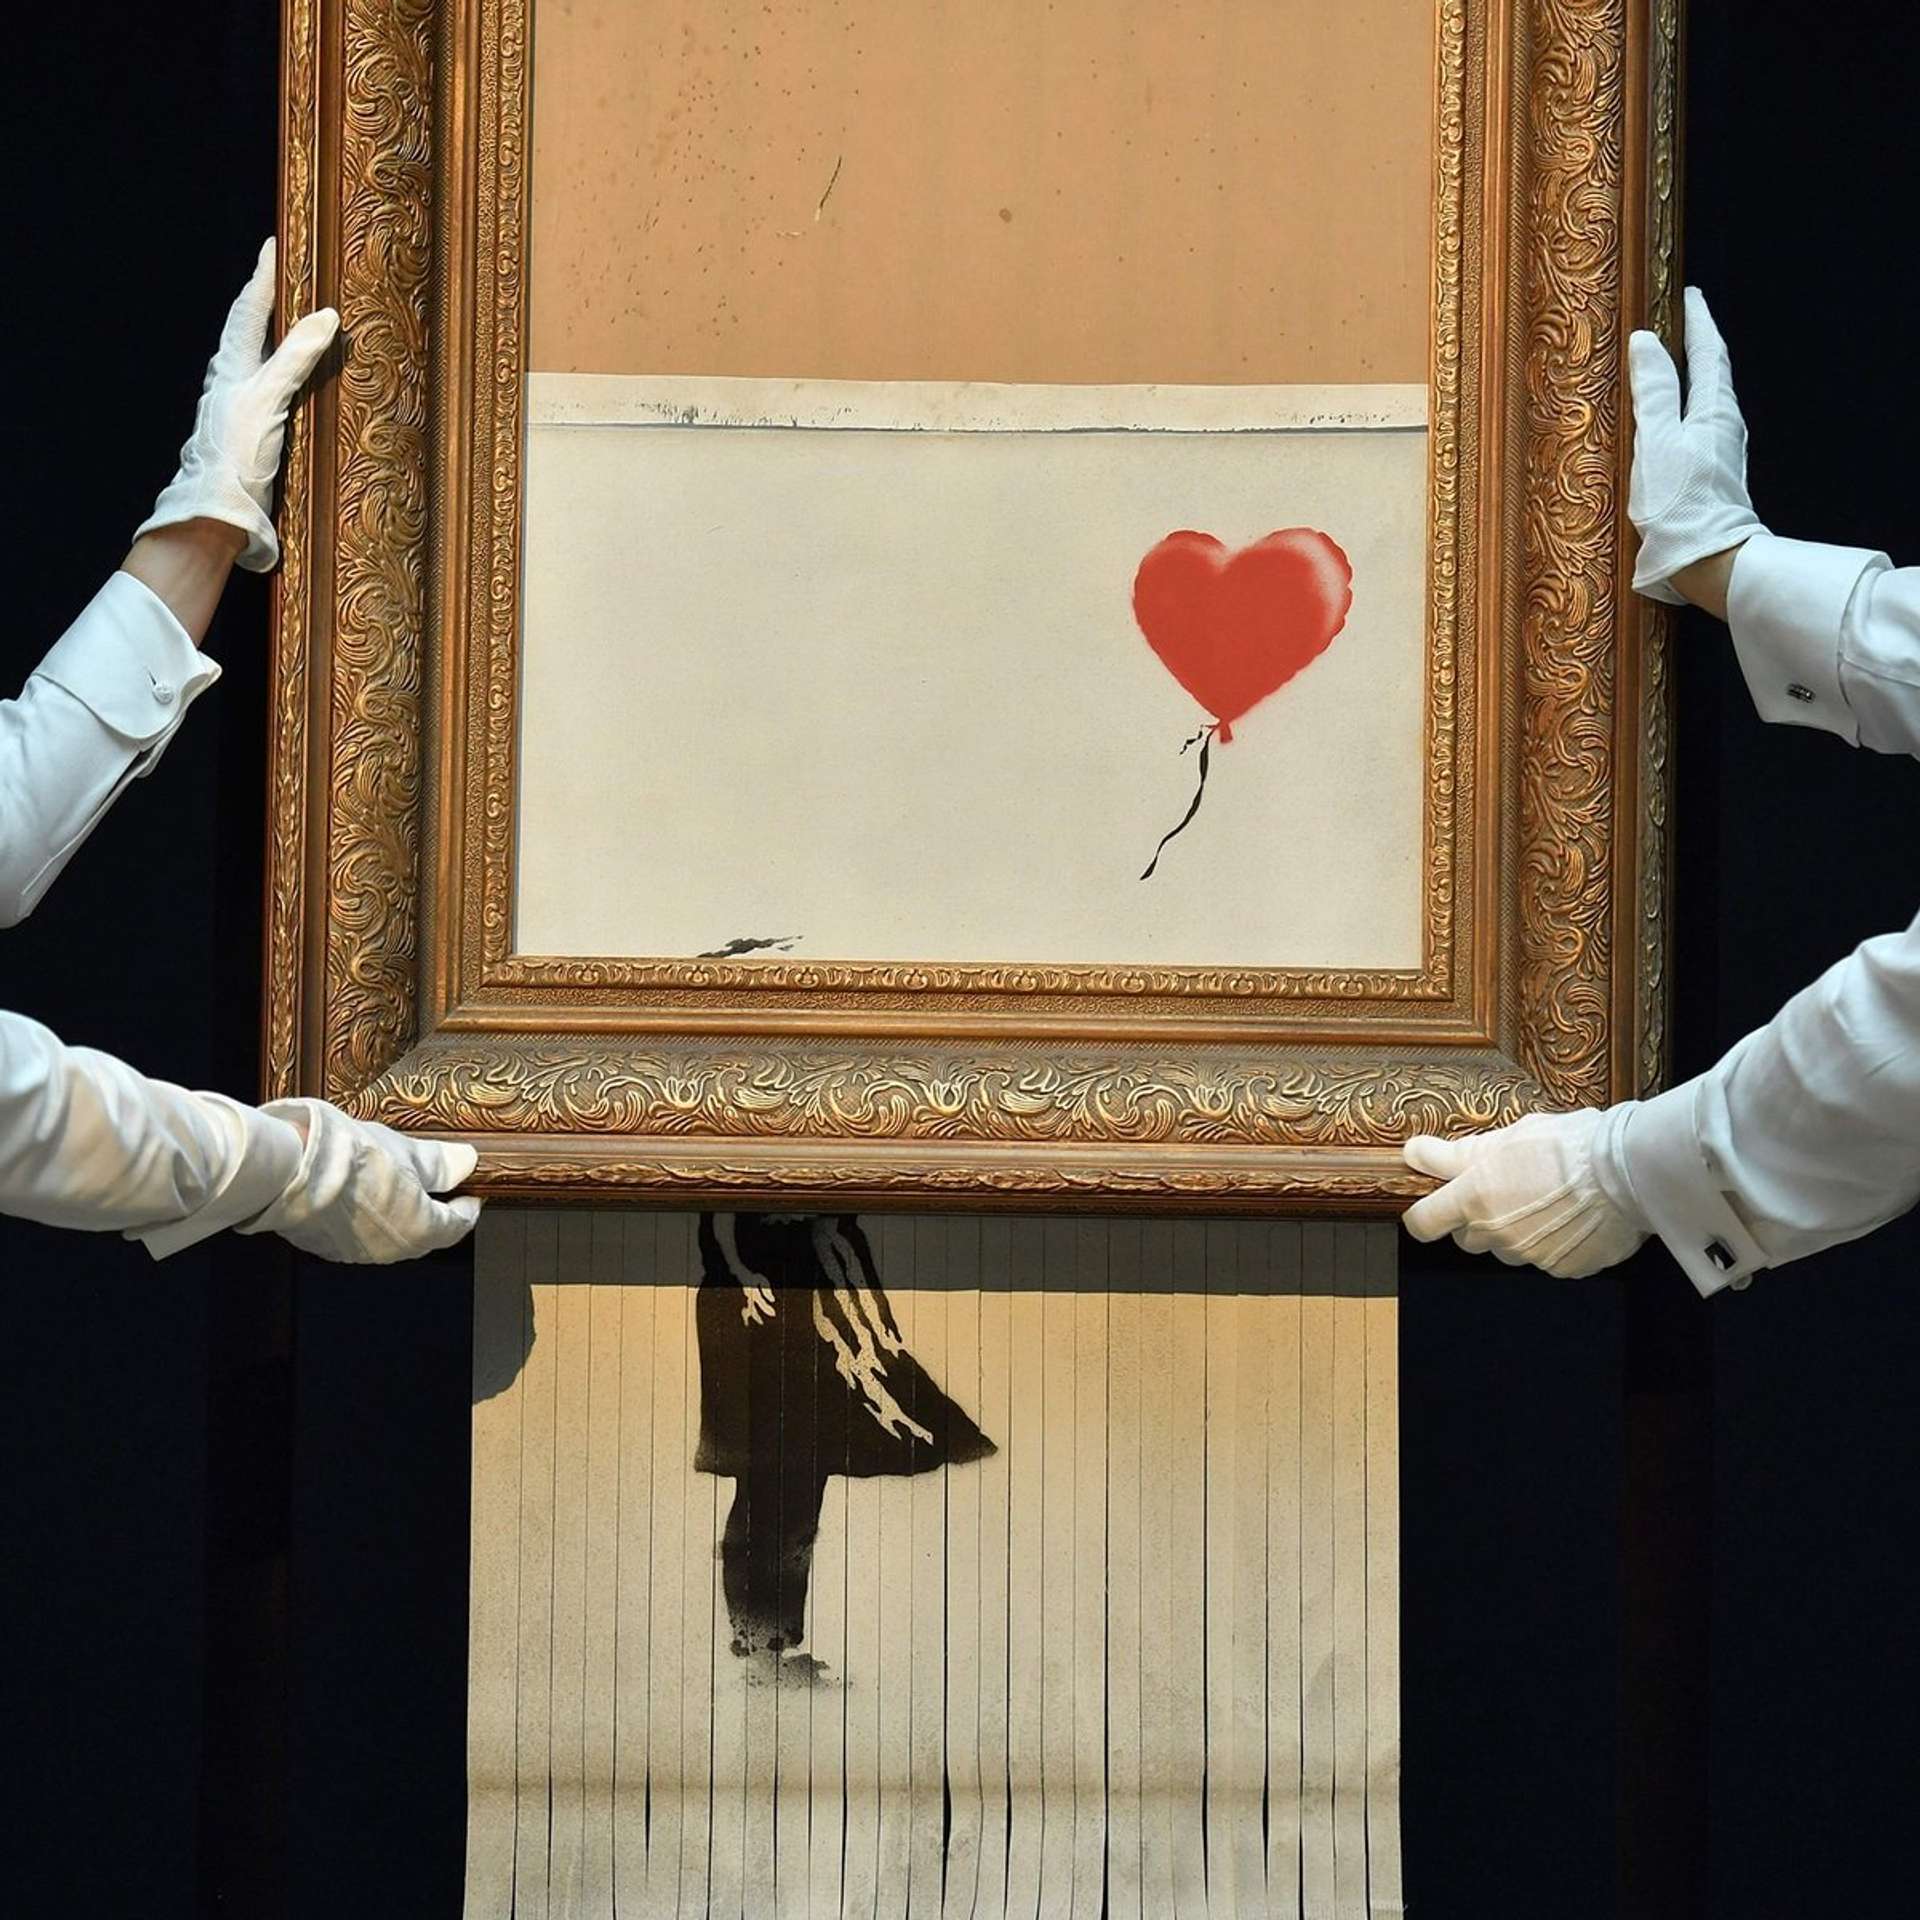 A photograph of two Sotheby's auction staff handling Banksy's shredded Girl With Balloon artwork, which suspends below the gilt frame in shreds.